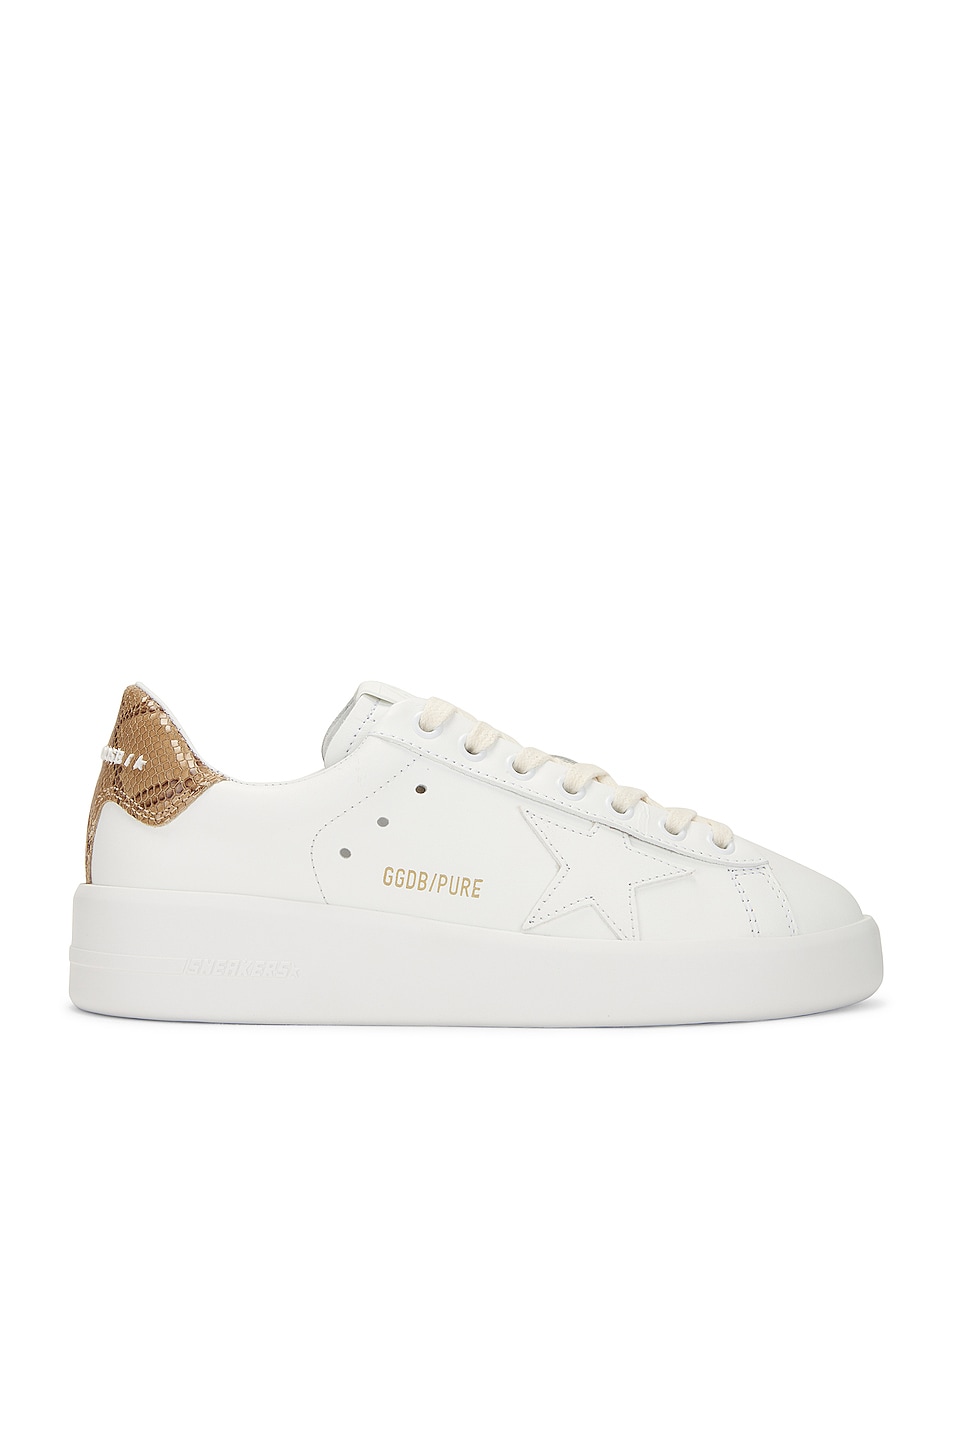 Image 1 of Golden Goose Pure Star Sneaker in White & Beige